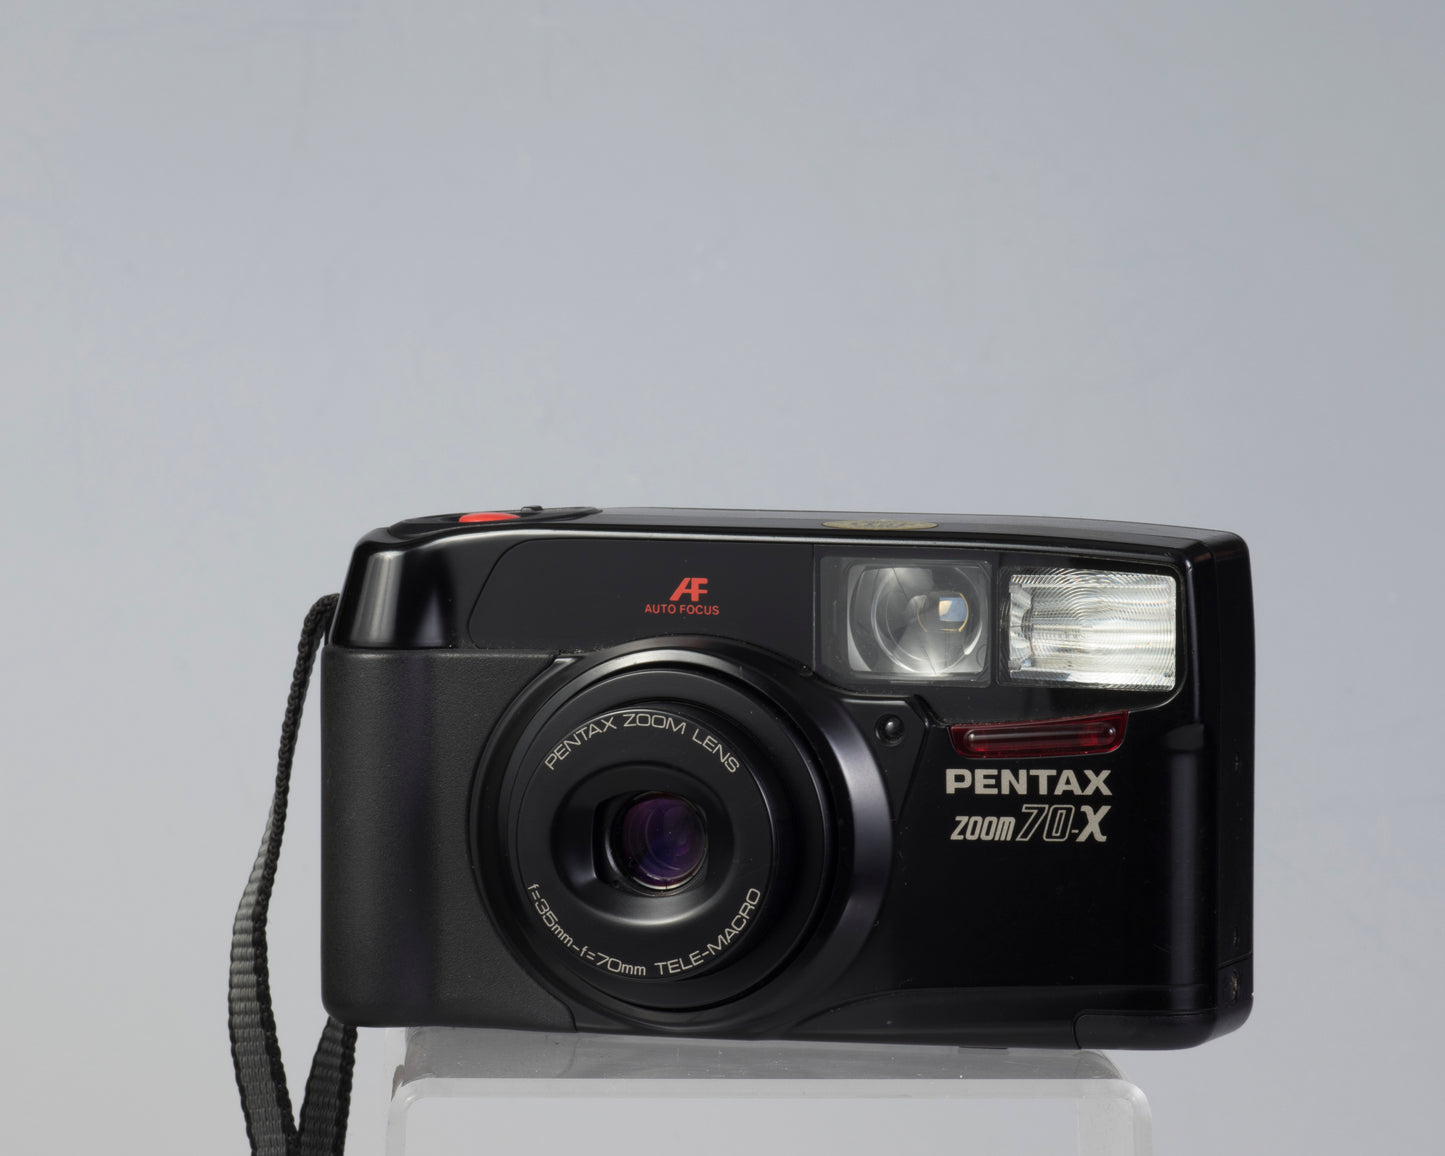 Pentax Zoom 70-X 35mm camera *LCD screen issues; otherwise works well* (serial 7813716)